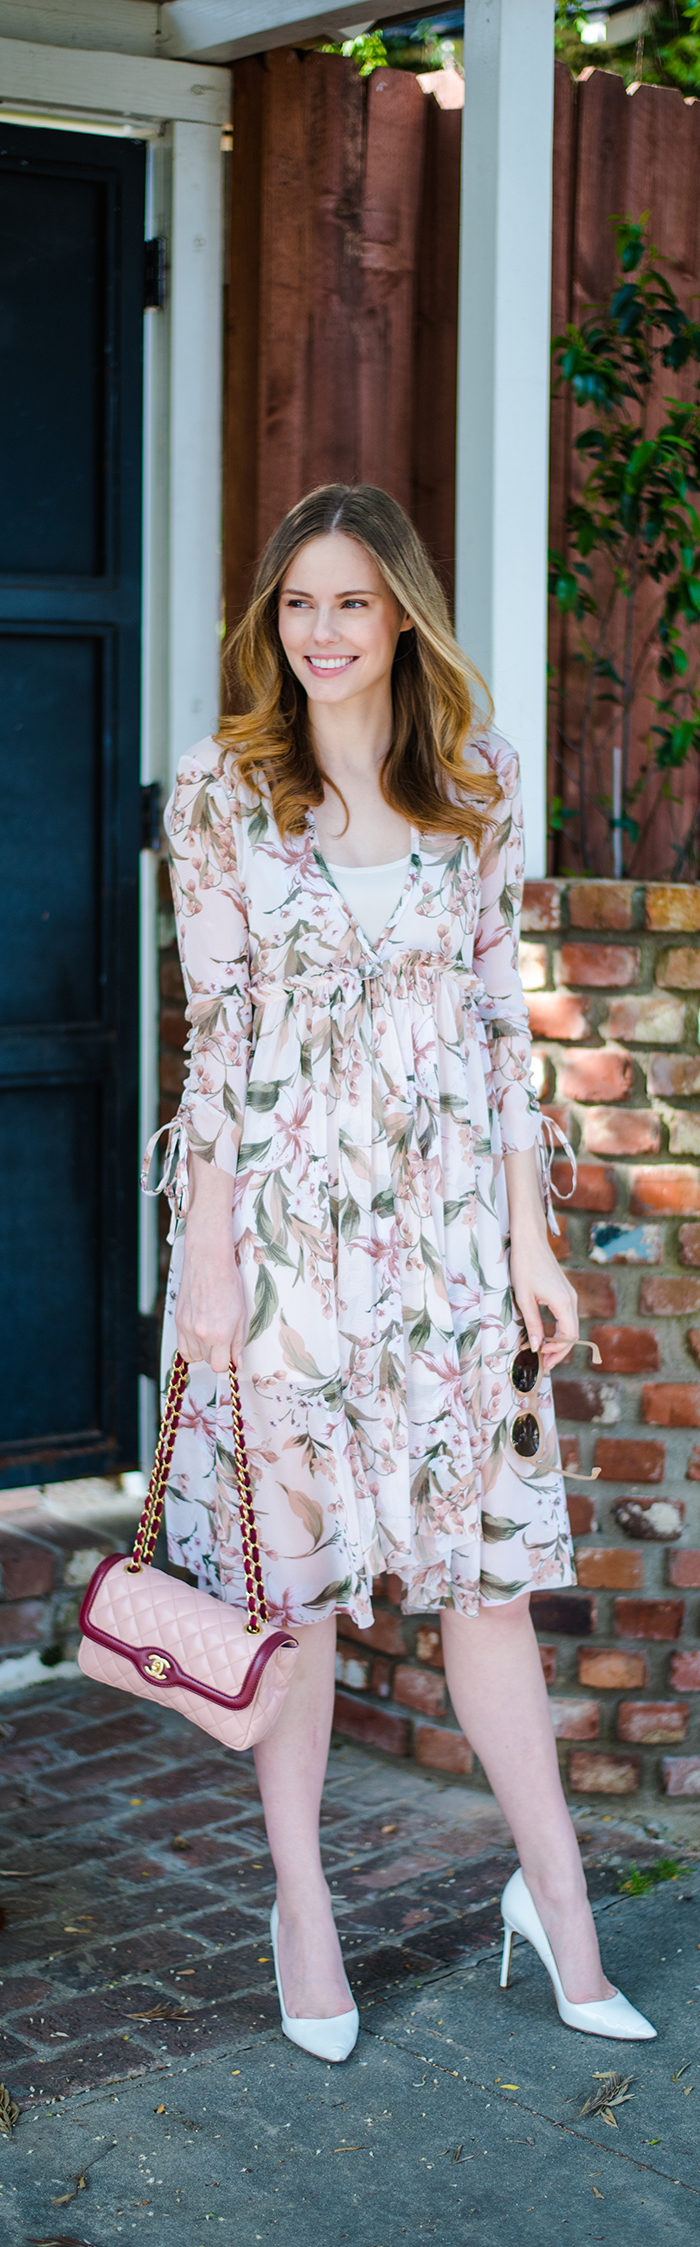 Miss USA 2011 Alyssa Campanella of The A List blog turns 27 in Topshop Floral Lily Mesh dress